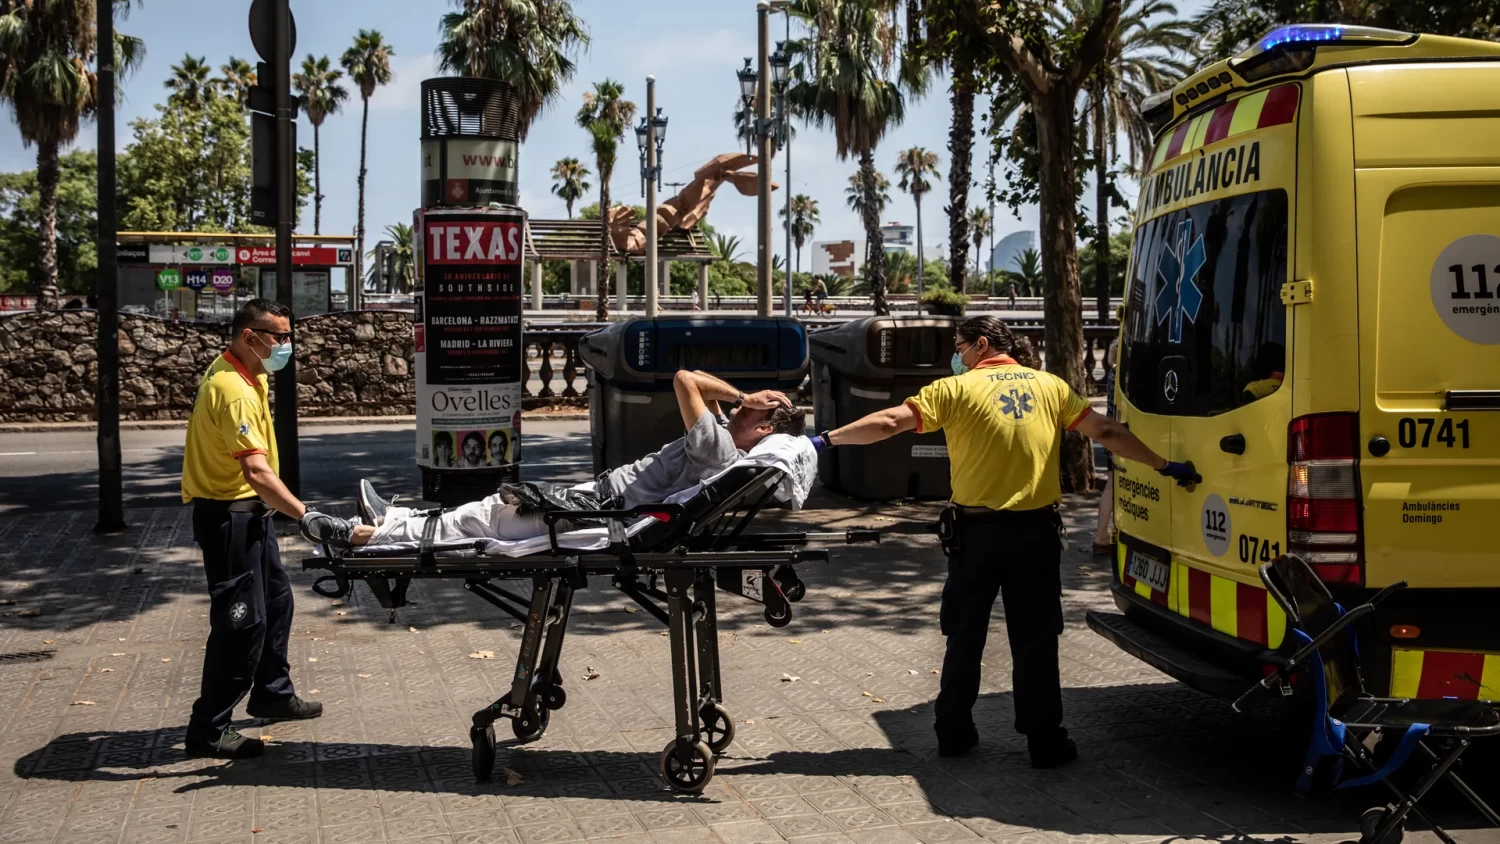 Paramedics tending to a patient in Barcelona, Spain, during a heat wave in July 2022. Photo: Angel Garcia/Bloomberg via Getty Images